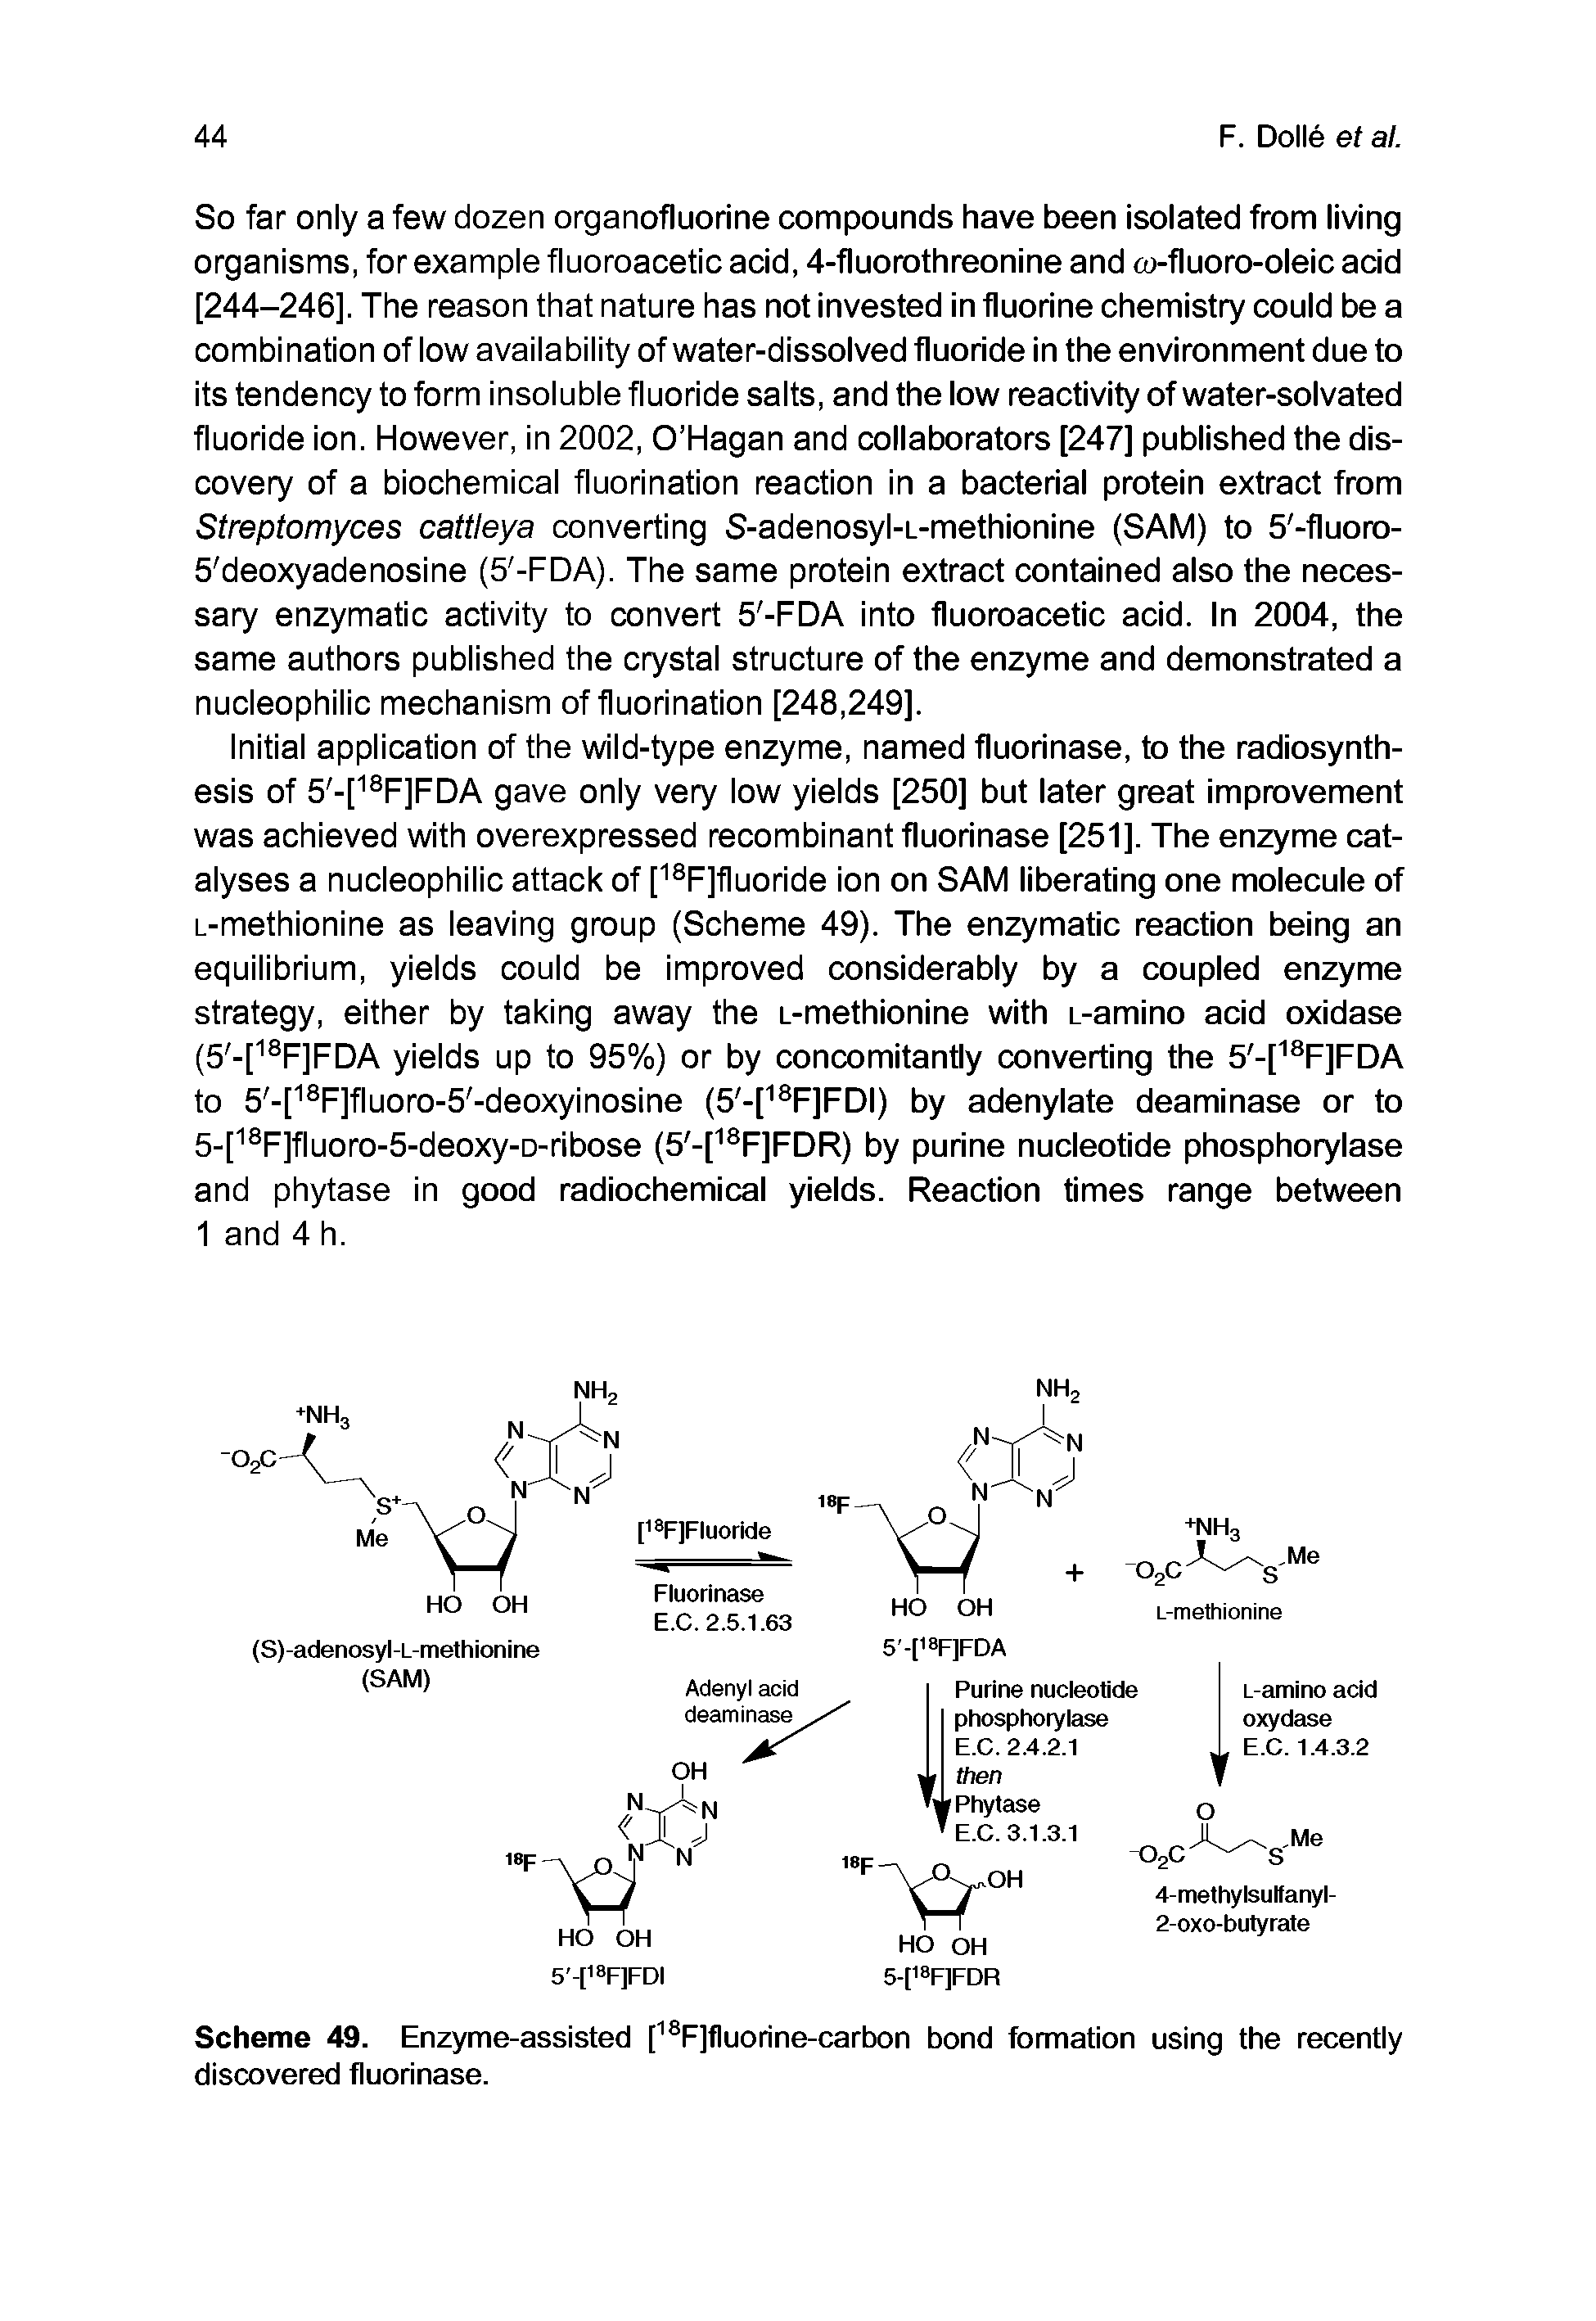 Scheme 49. Enzyme-assisted [ F]fluorine-carbon bond formation using the recently discovered fluorinase.